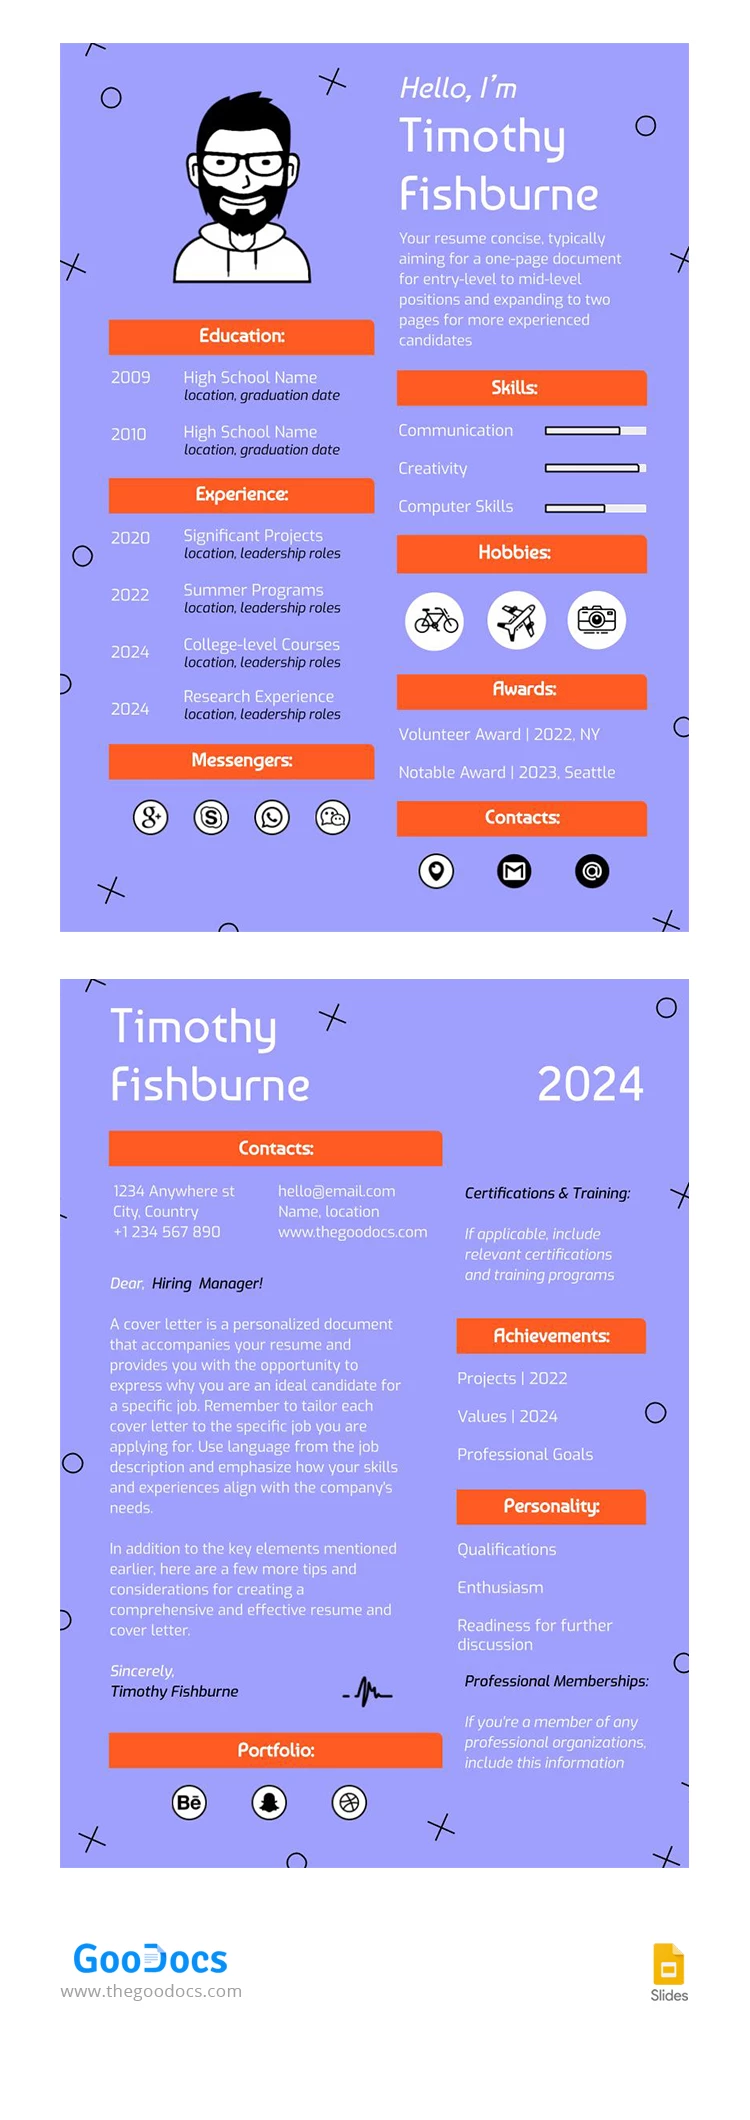 Illustrated Resume & Cover Letter - free Google Docs Template - 10067955